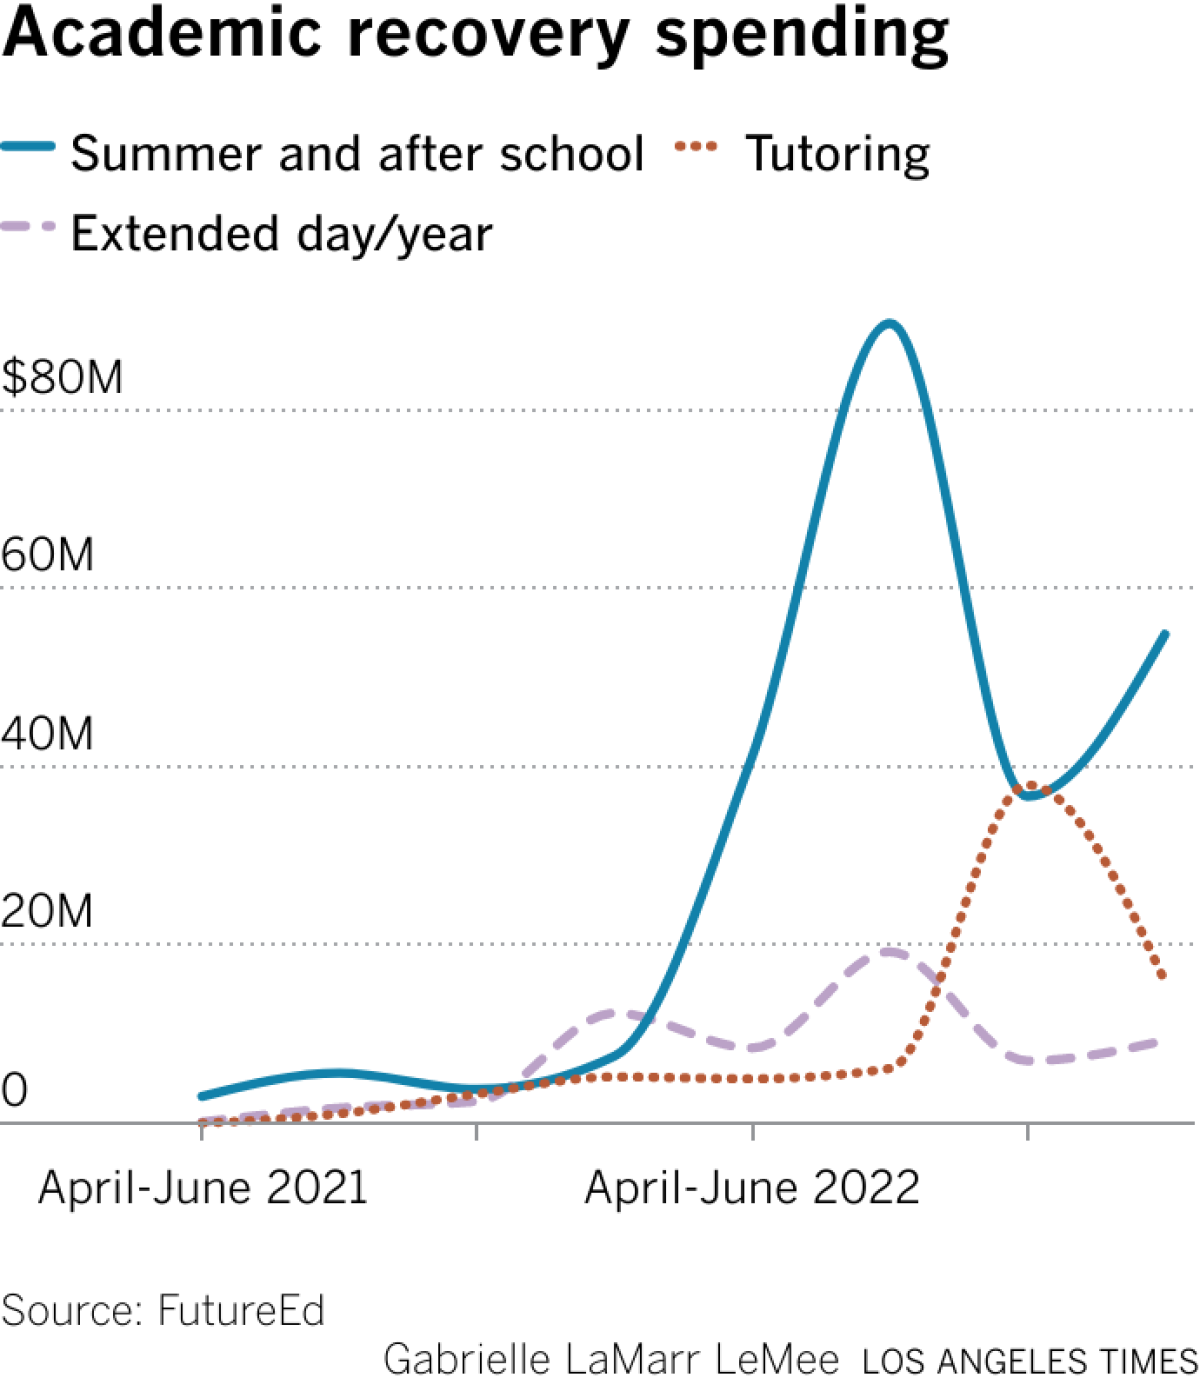 A line chart showing academic recovery spending over time broken into three categories: summer and afterschool, tutoring, and extended day/year. Summer and afterschool had the most spending, increasing dramatically during the summer of 2022. 